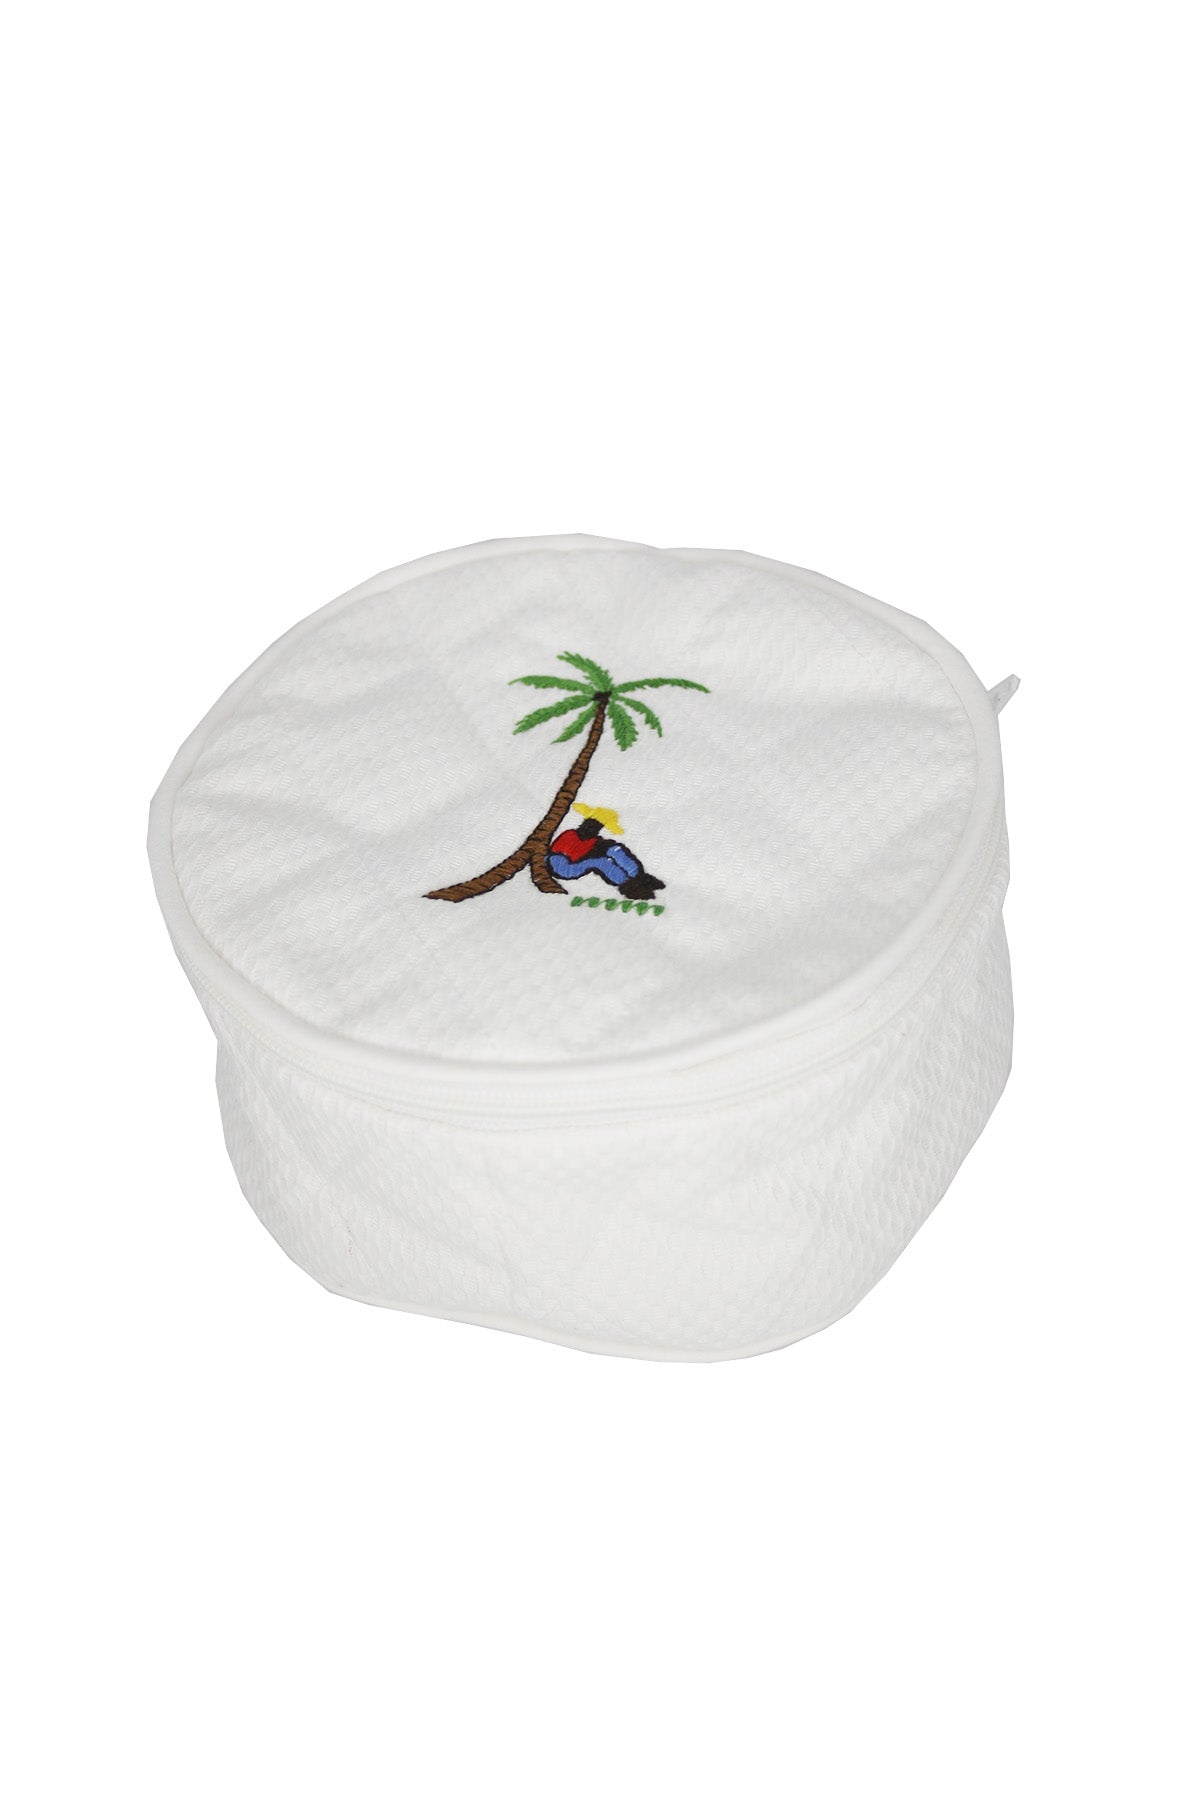 Embroidered Linen Jewellery Pouch with Palm Tree